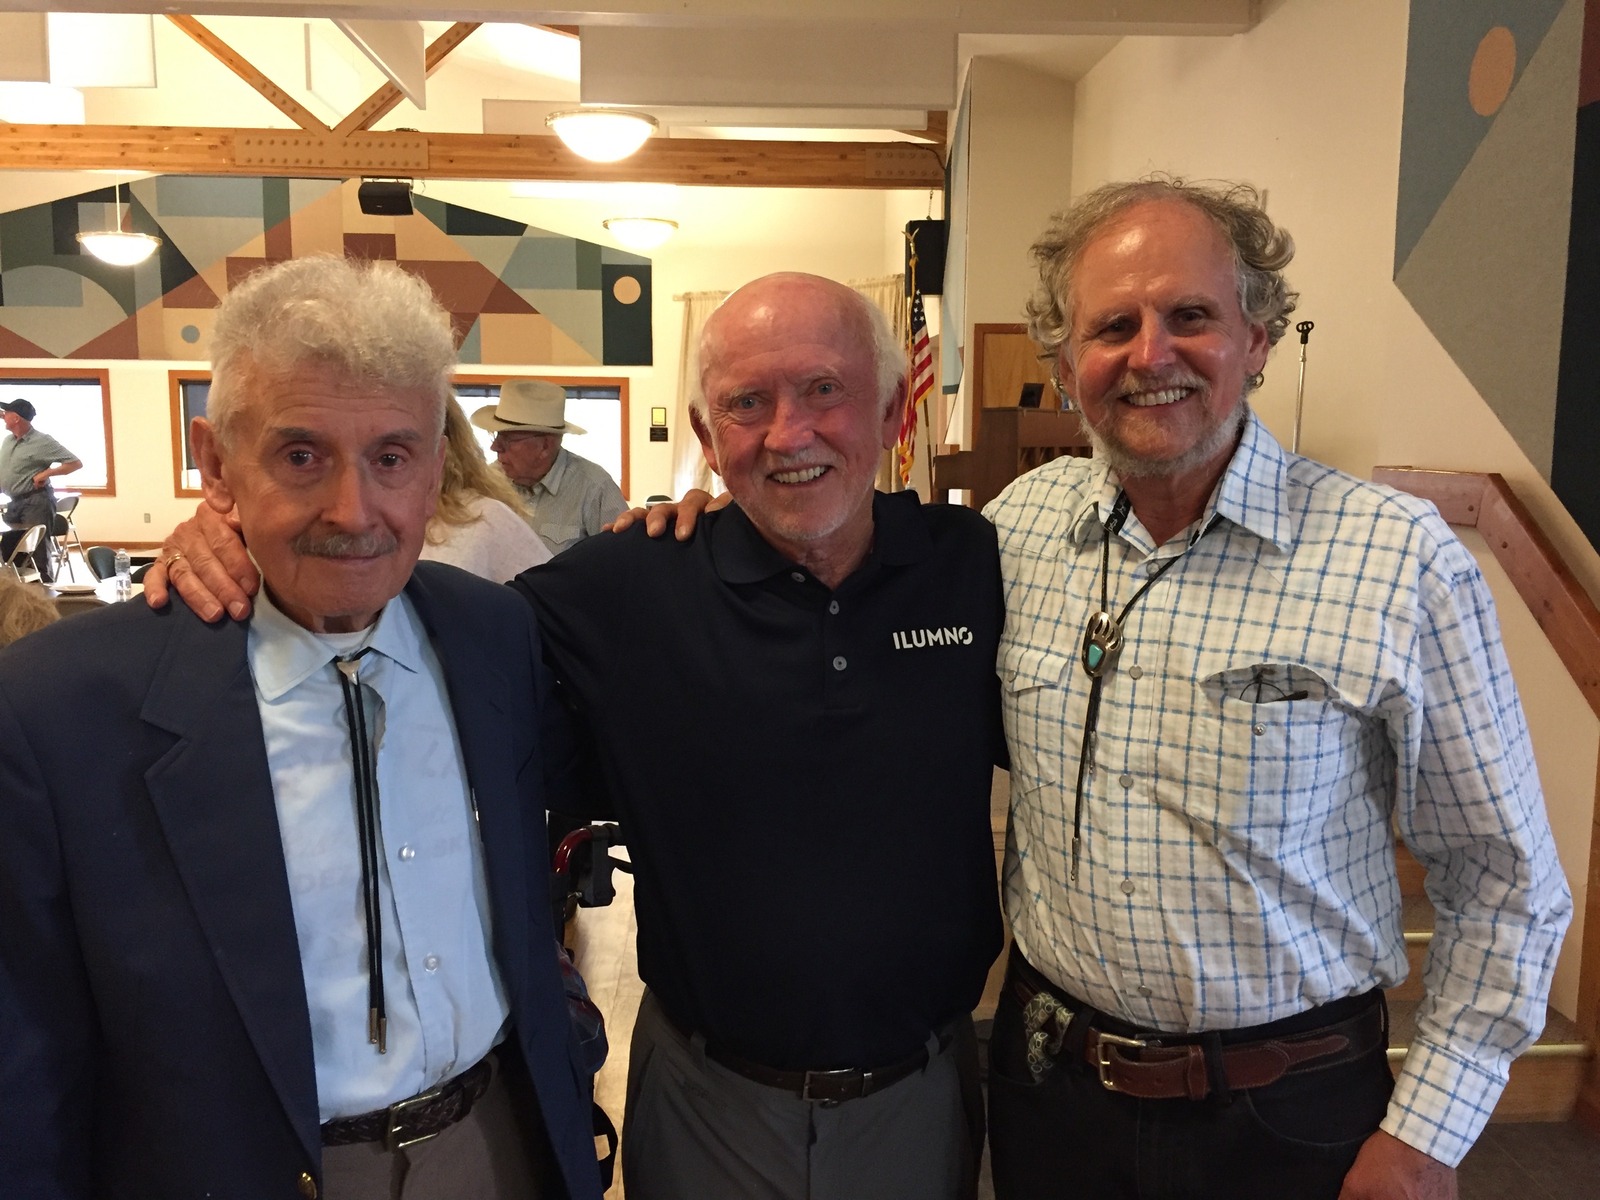 A large crowd turned out to help Gutkoski celebrate his 90th birthday, including his pal, Keith McCafferty, at right. Photo by Todd Wilkinson